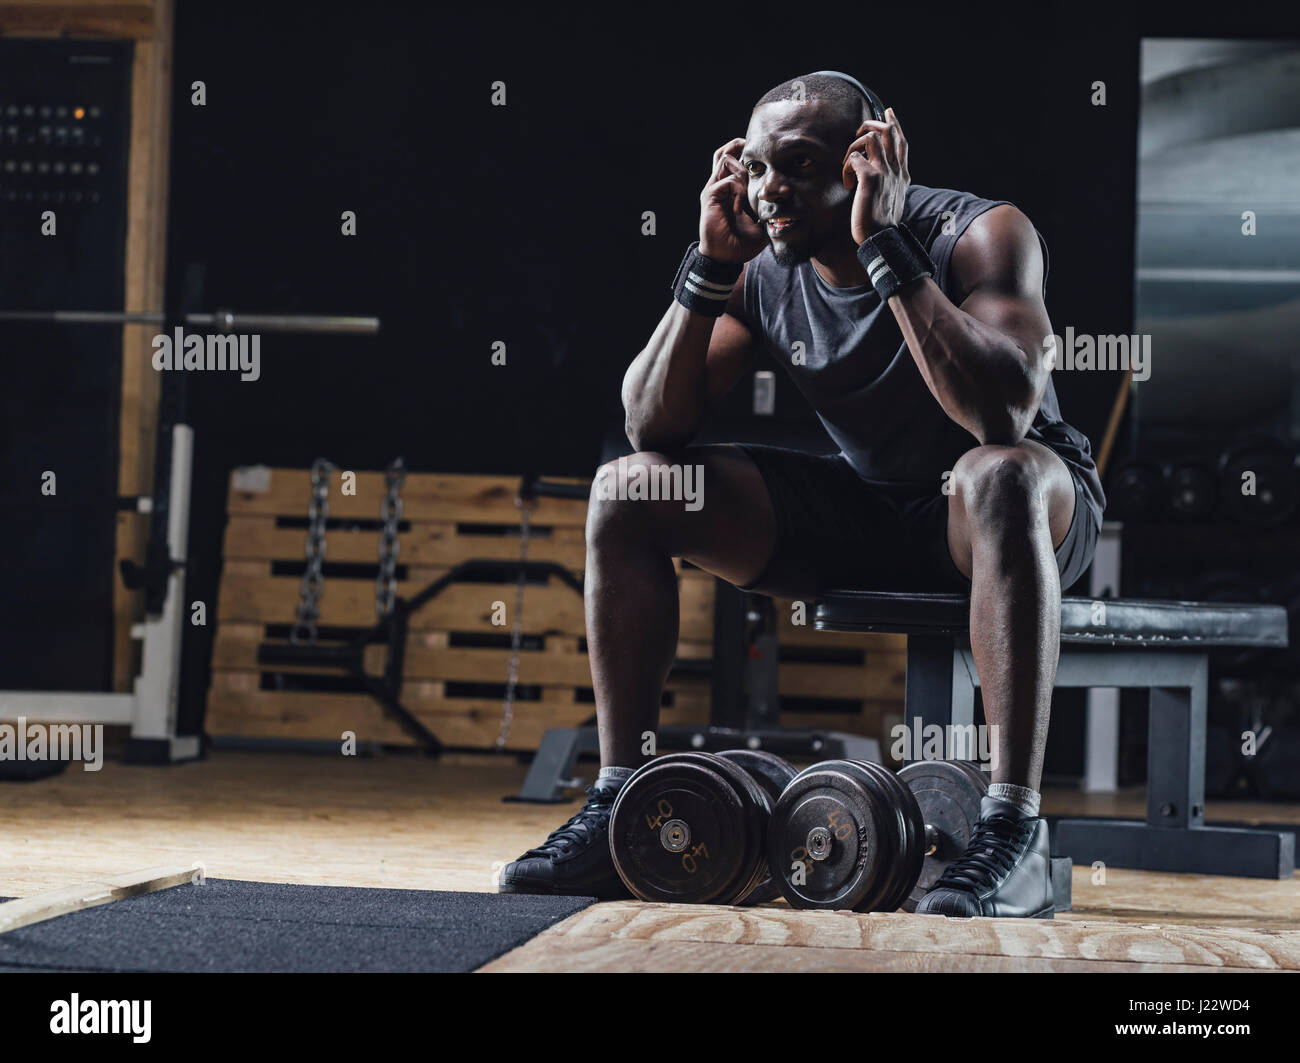 Athlete sitting in gym, wearing headphones, concentrating Stock Photo